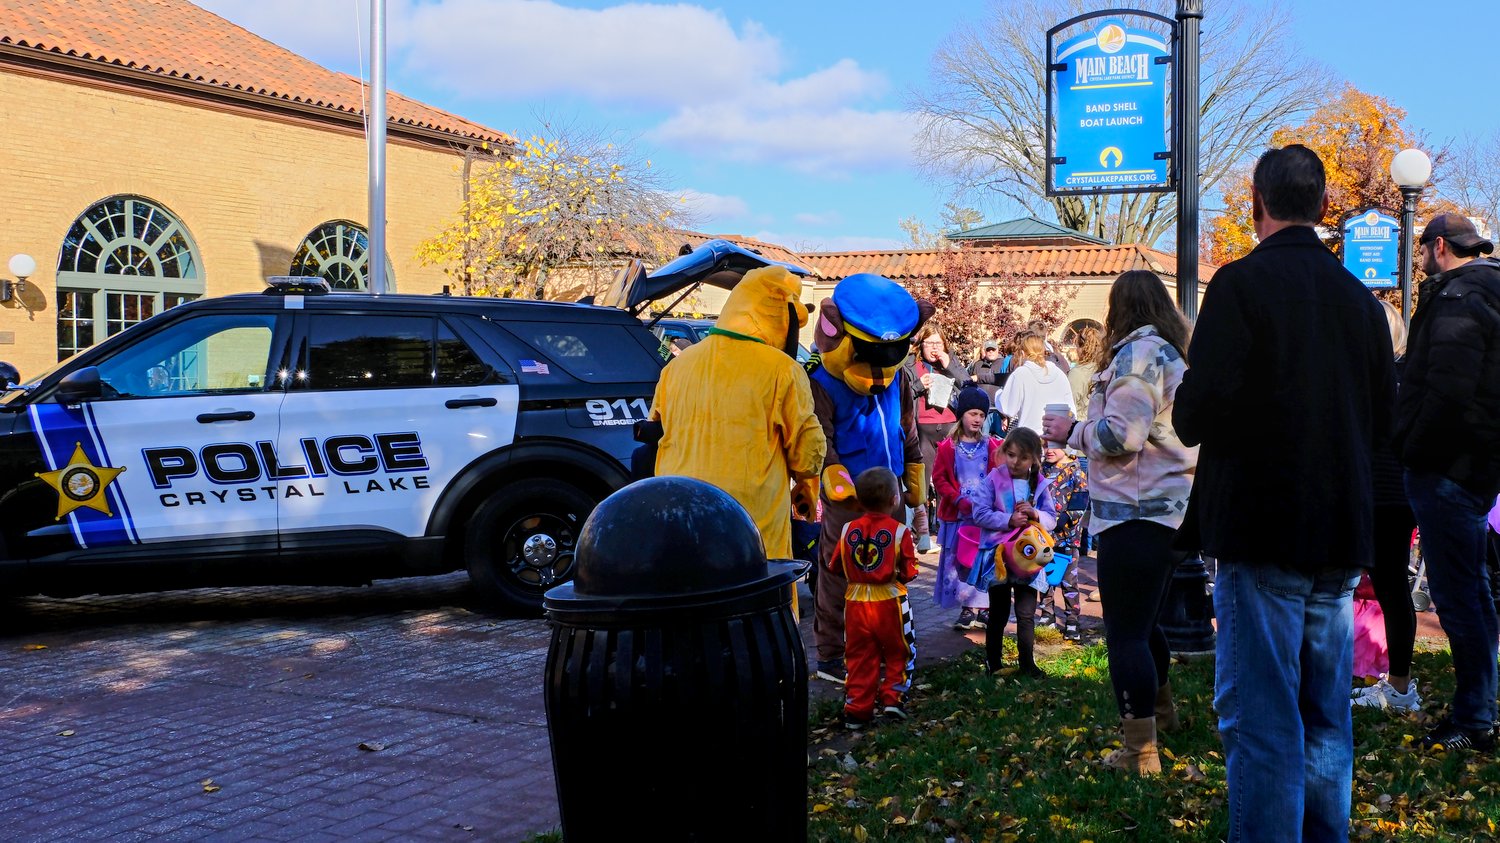 Photo opportunity with Crystal Lake Police.